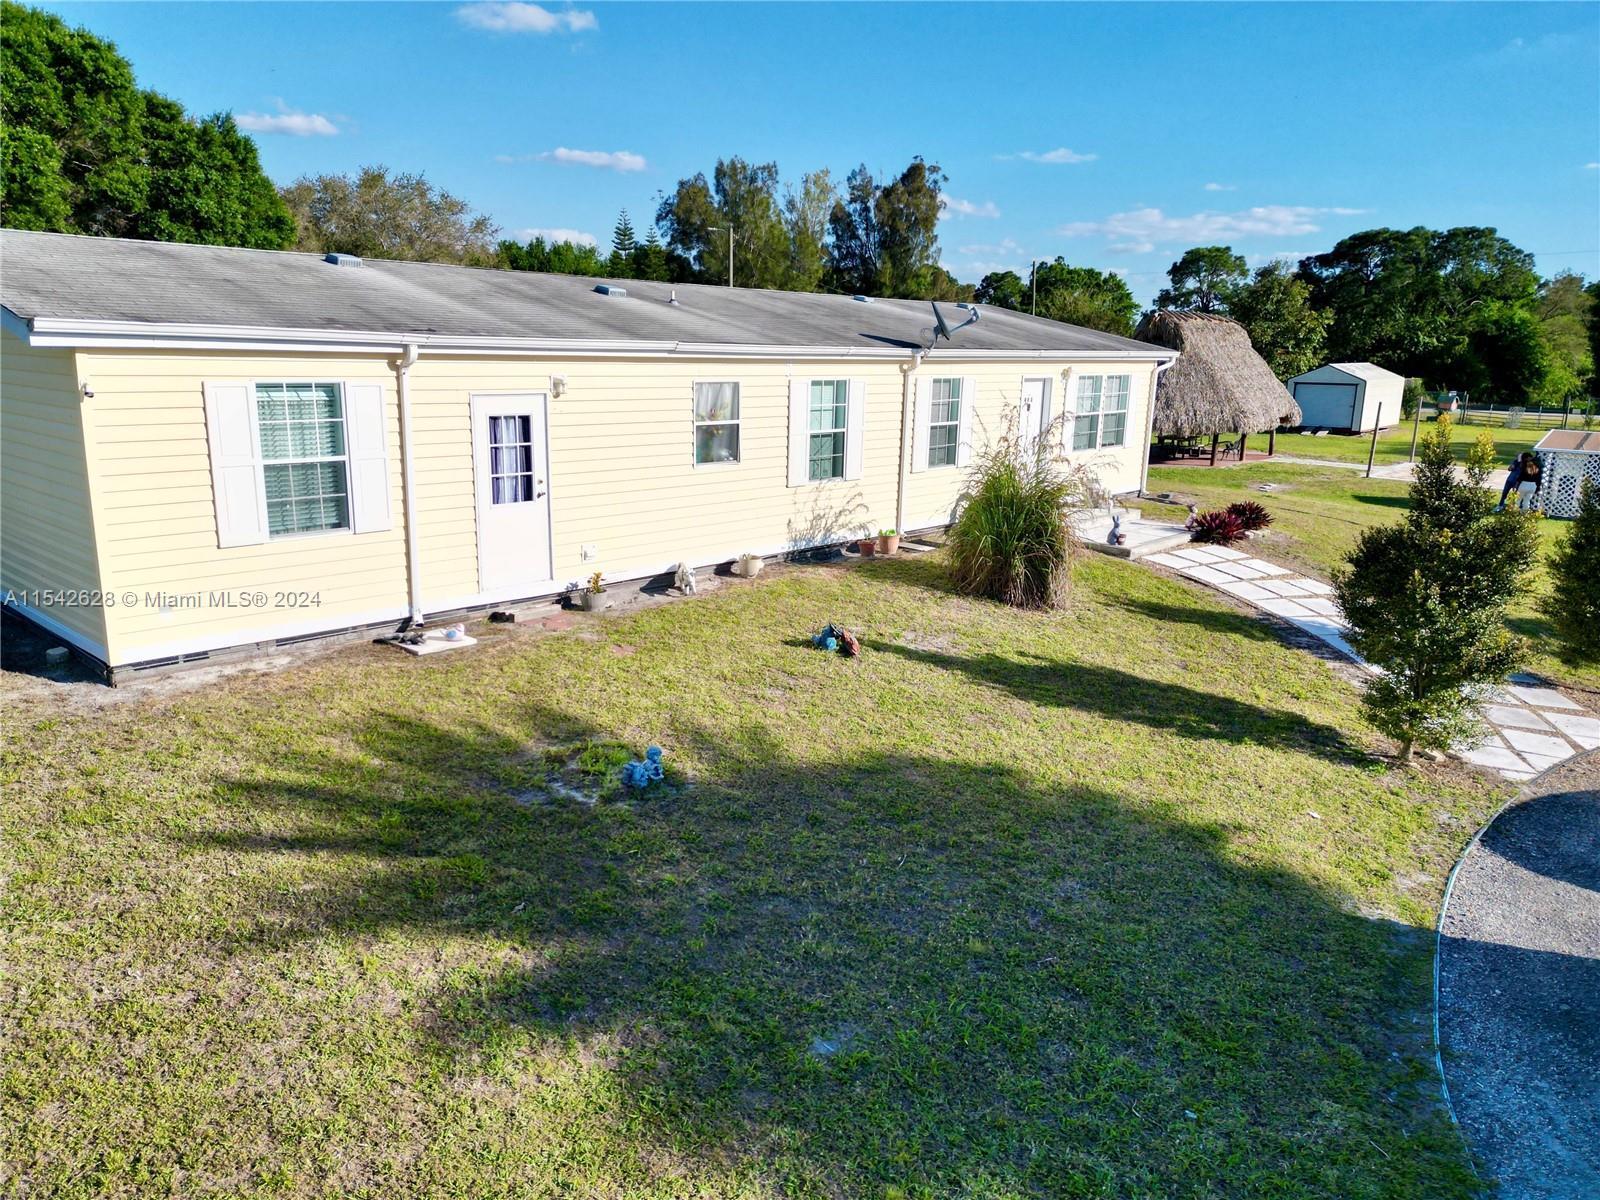 Photo of 403 Horse Club Ave in Clewiston, FL